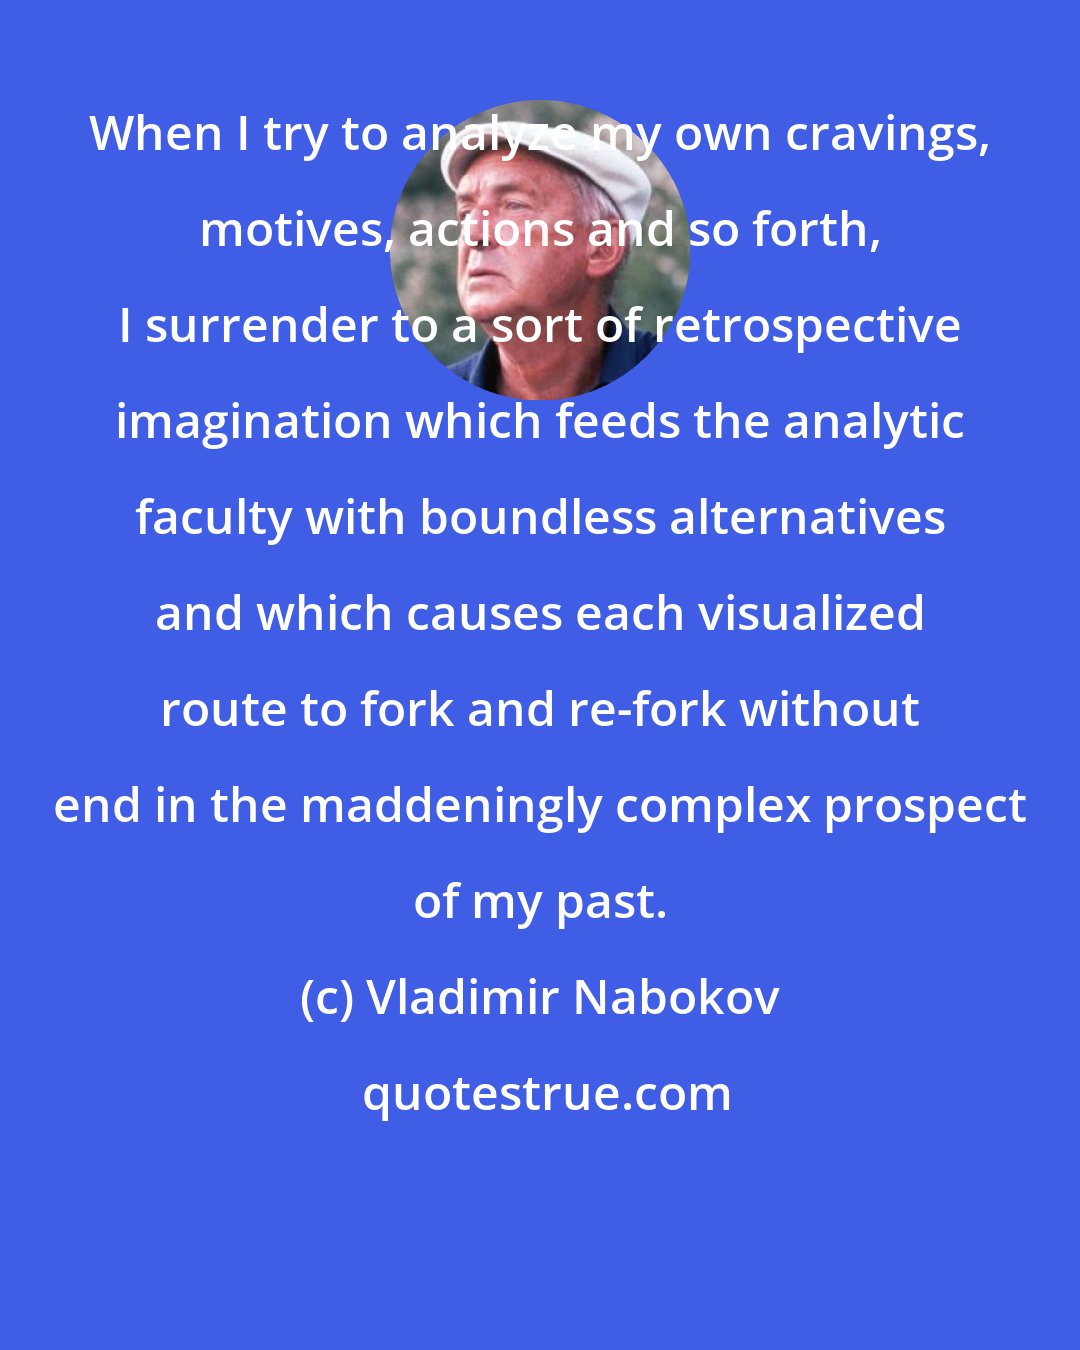 Vladimir Nabokov: When I try to analyze my own cravings, motives, actions and so forth, I surrender to a sort of retrospective imagination which feeds the analytic faculty with boundless alternatives and which causes each visualized route to fork and re-fork without end in the maddeningly complex prospect of my past.